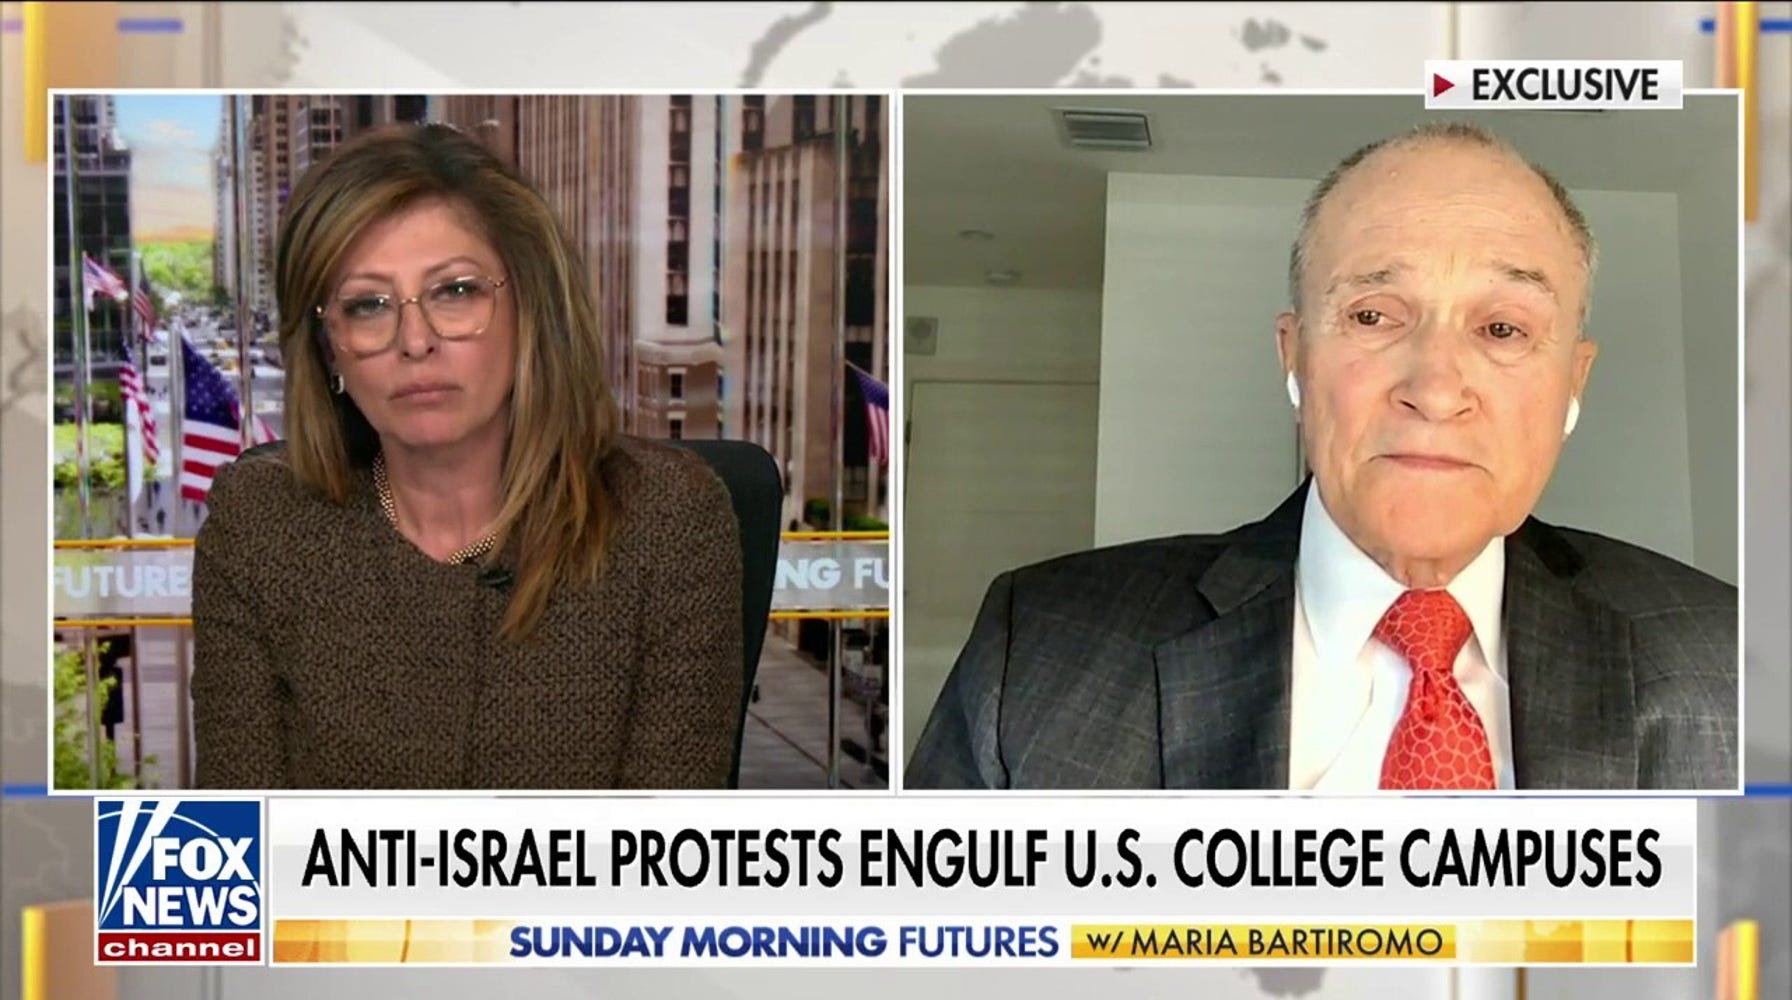 Soros Money Fueling Anti-Israel Protests on College Campuses